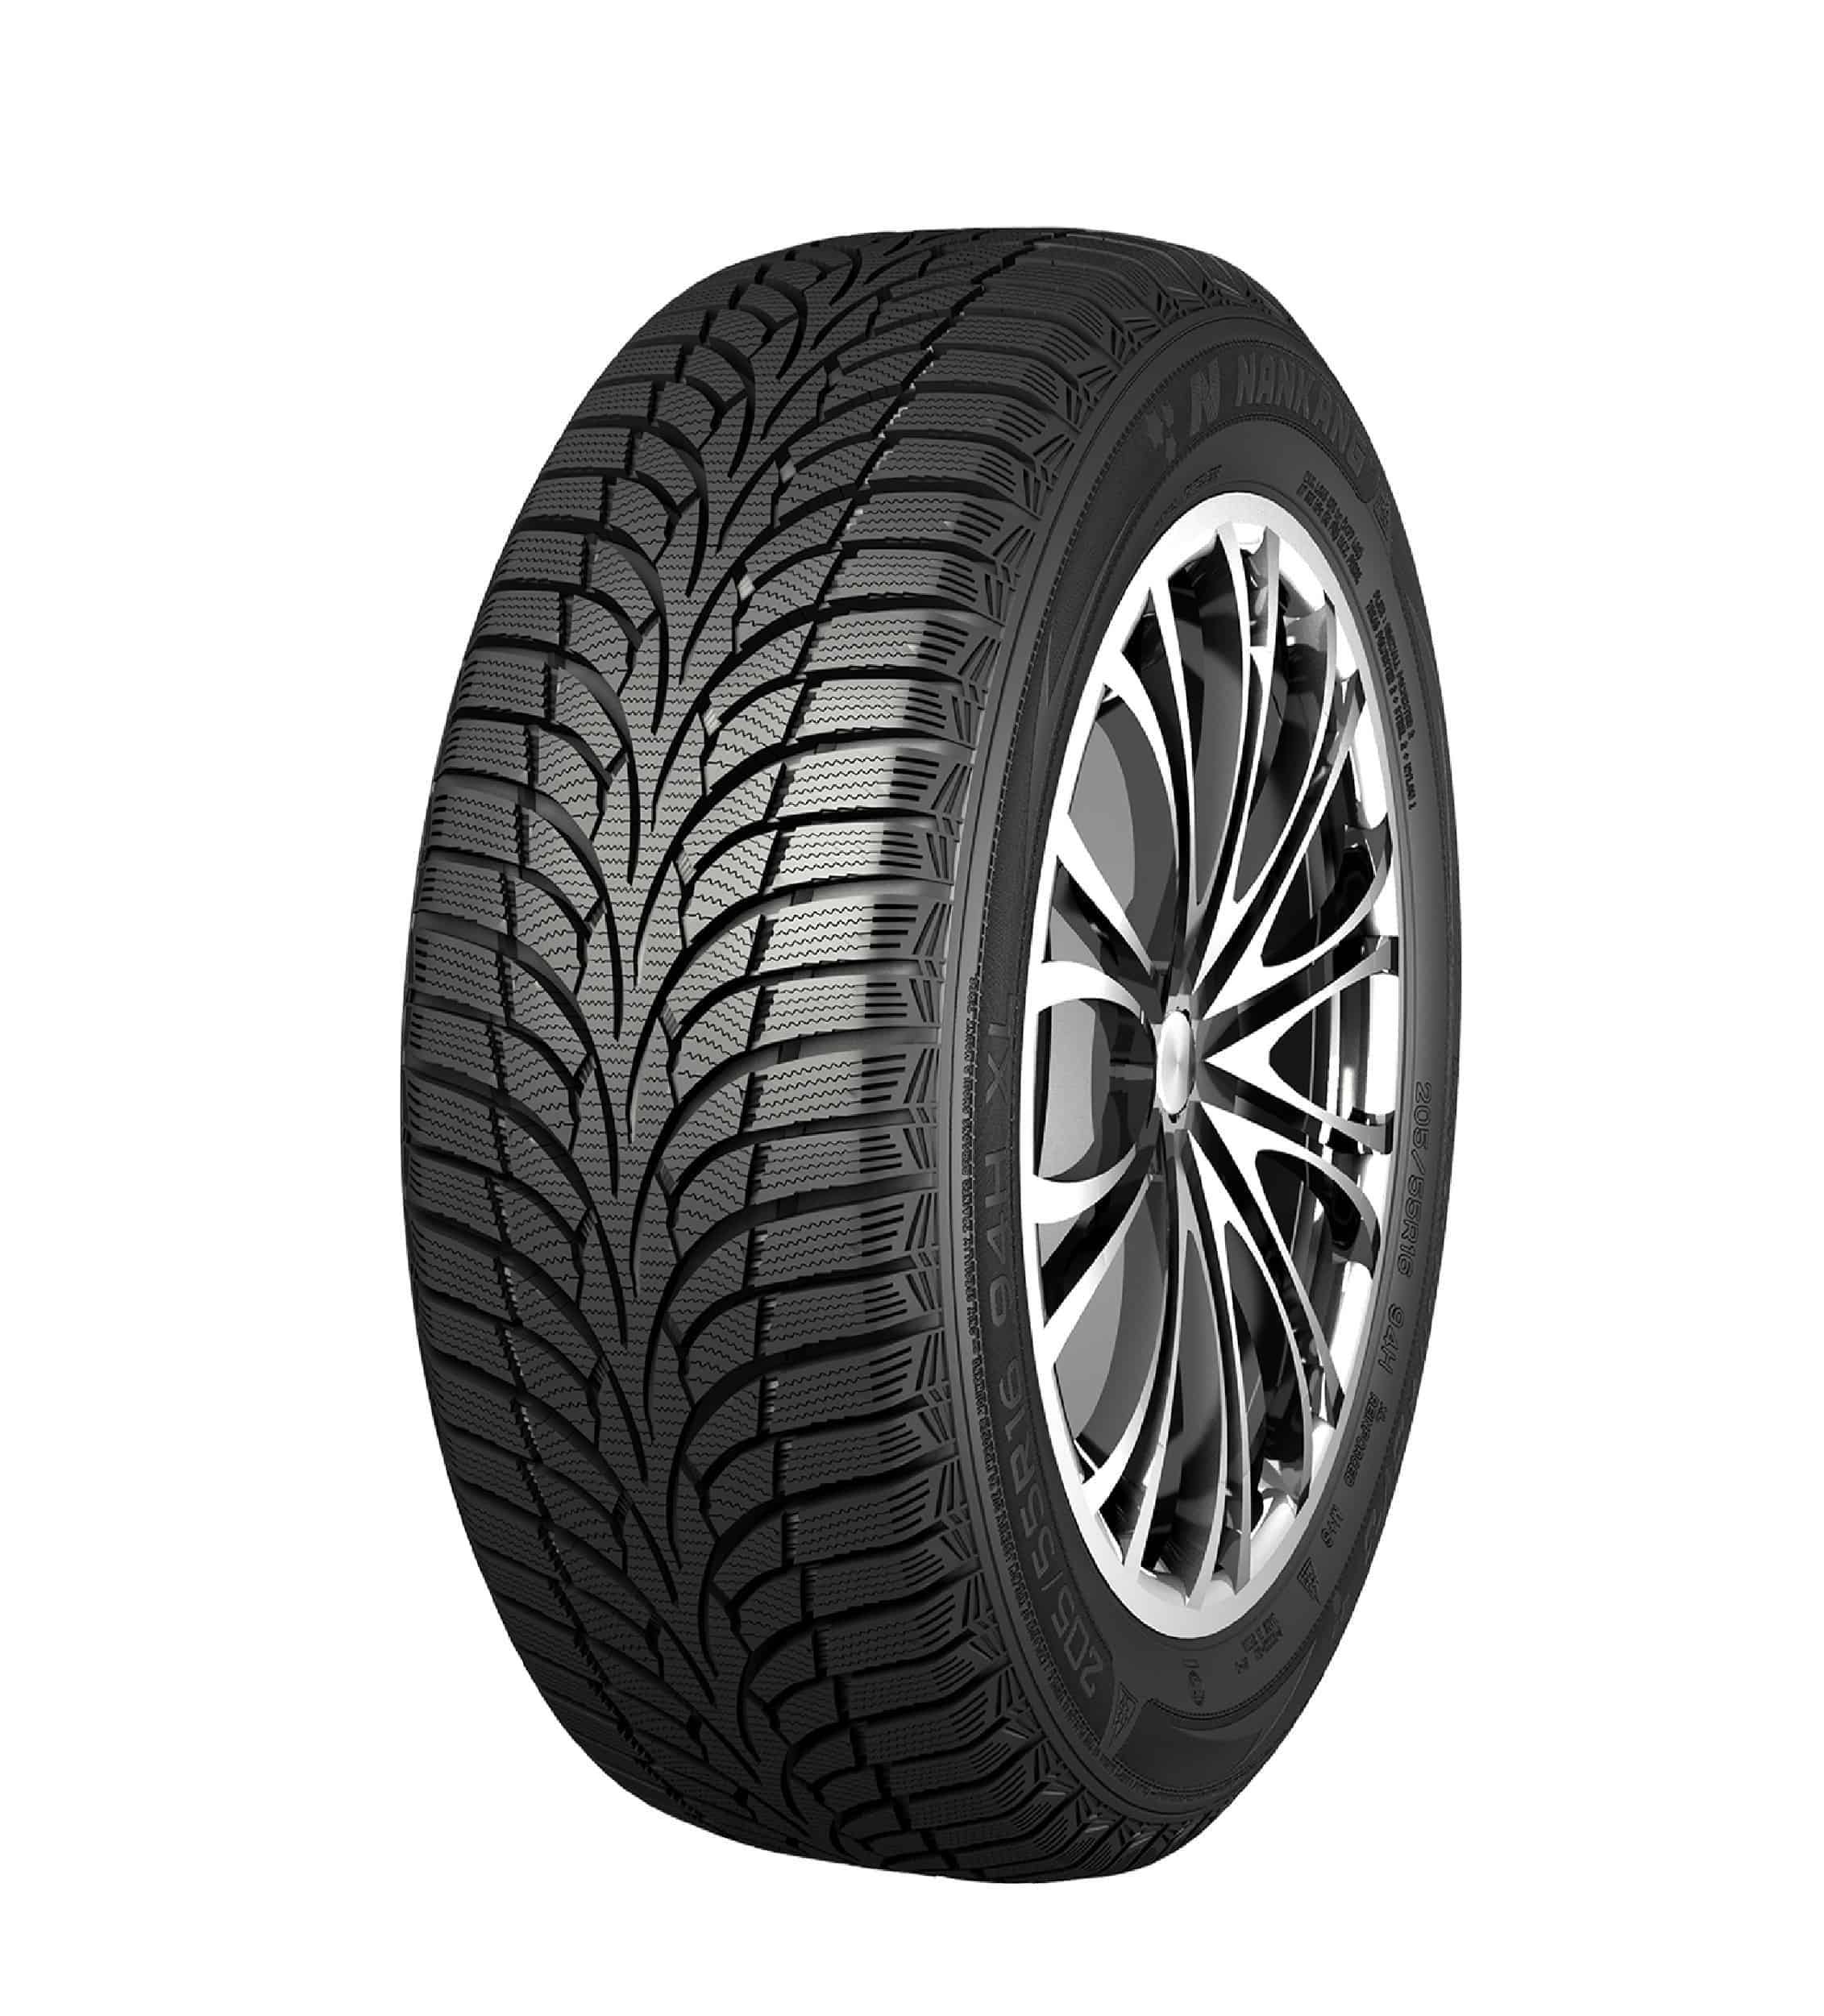 Gomme Nuove Nankang 215/60 R16 99H Winter Activa SV-3 XL M+S pneumatici nuovi Invernale